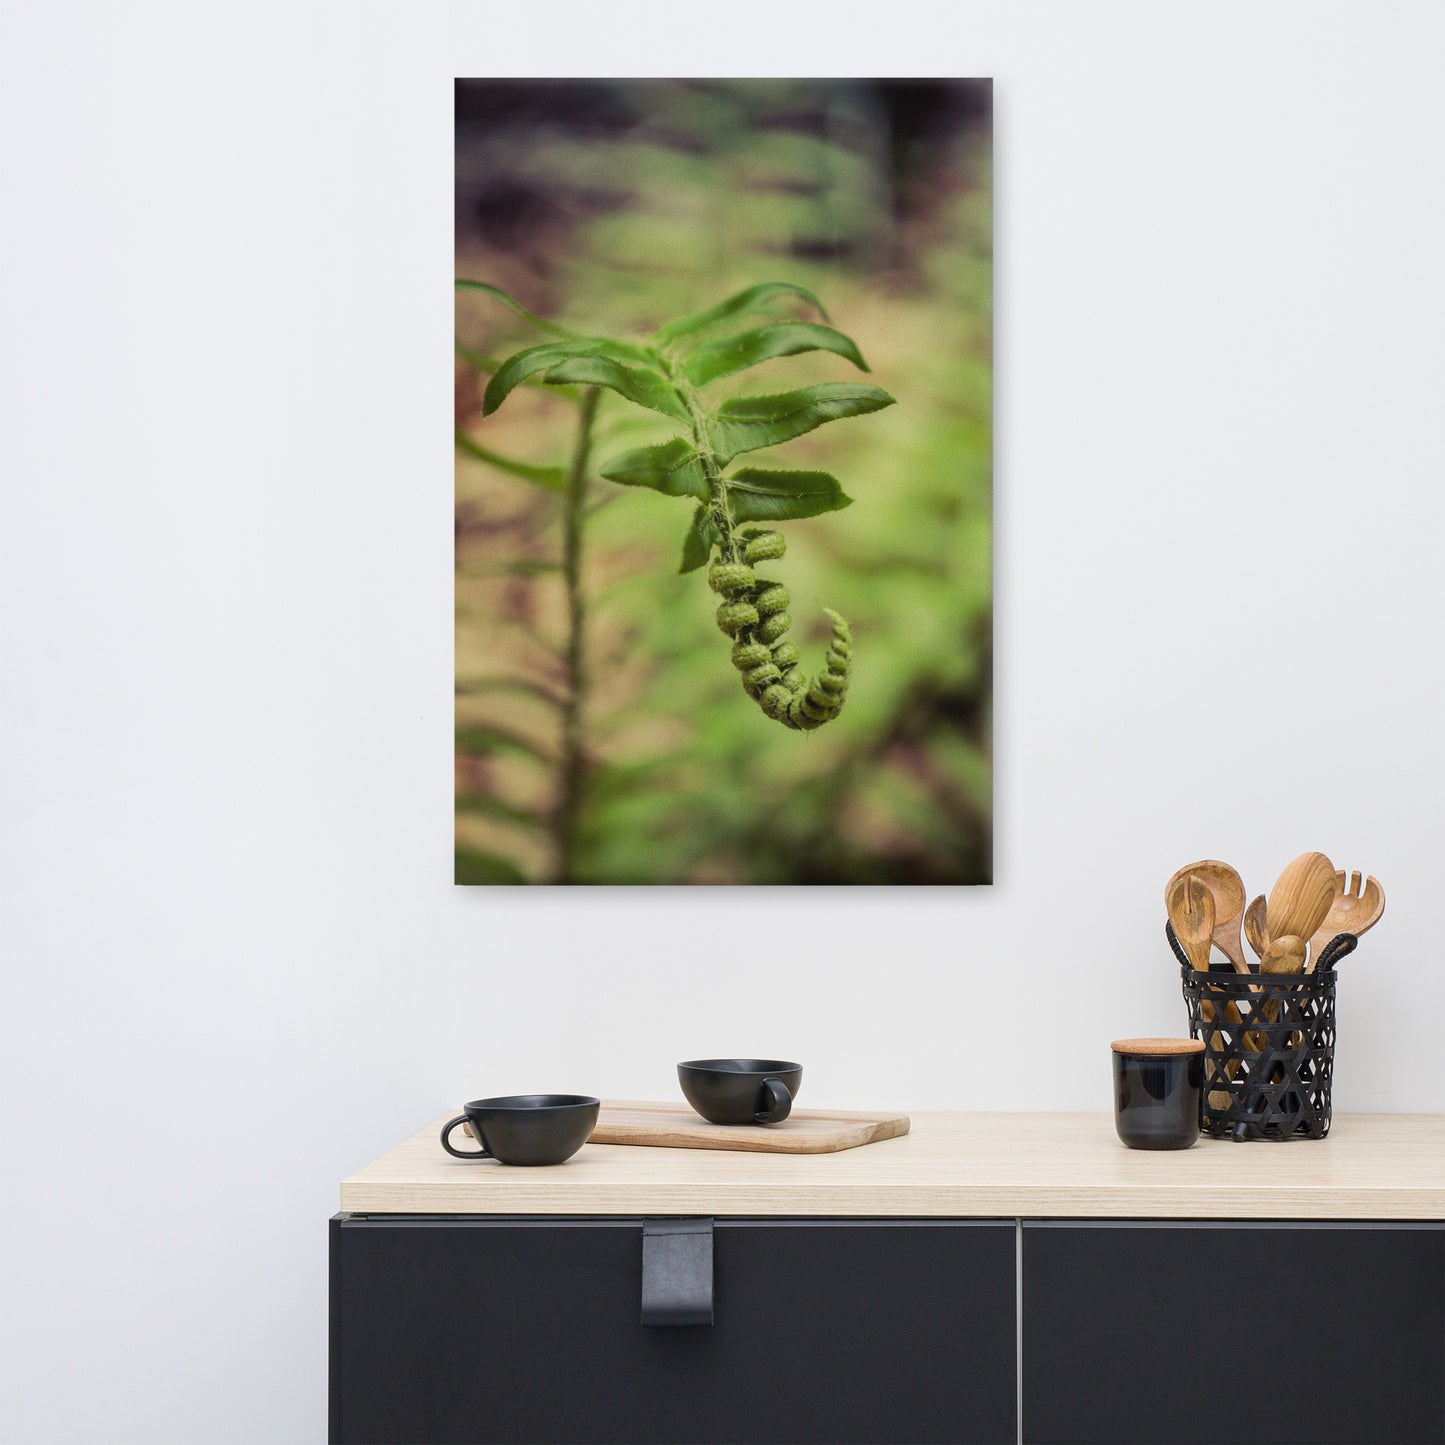 Growth of the Forest Floor Botanical Nature Canvas Wall Art Prints